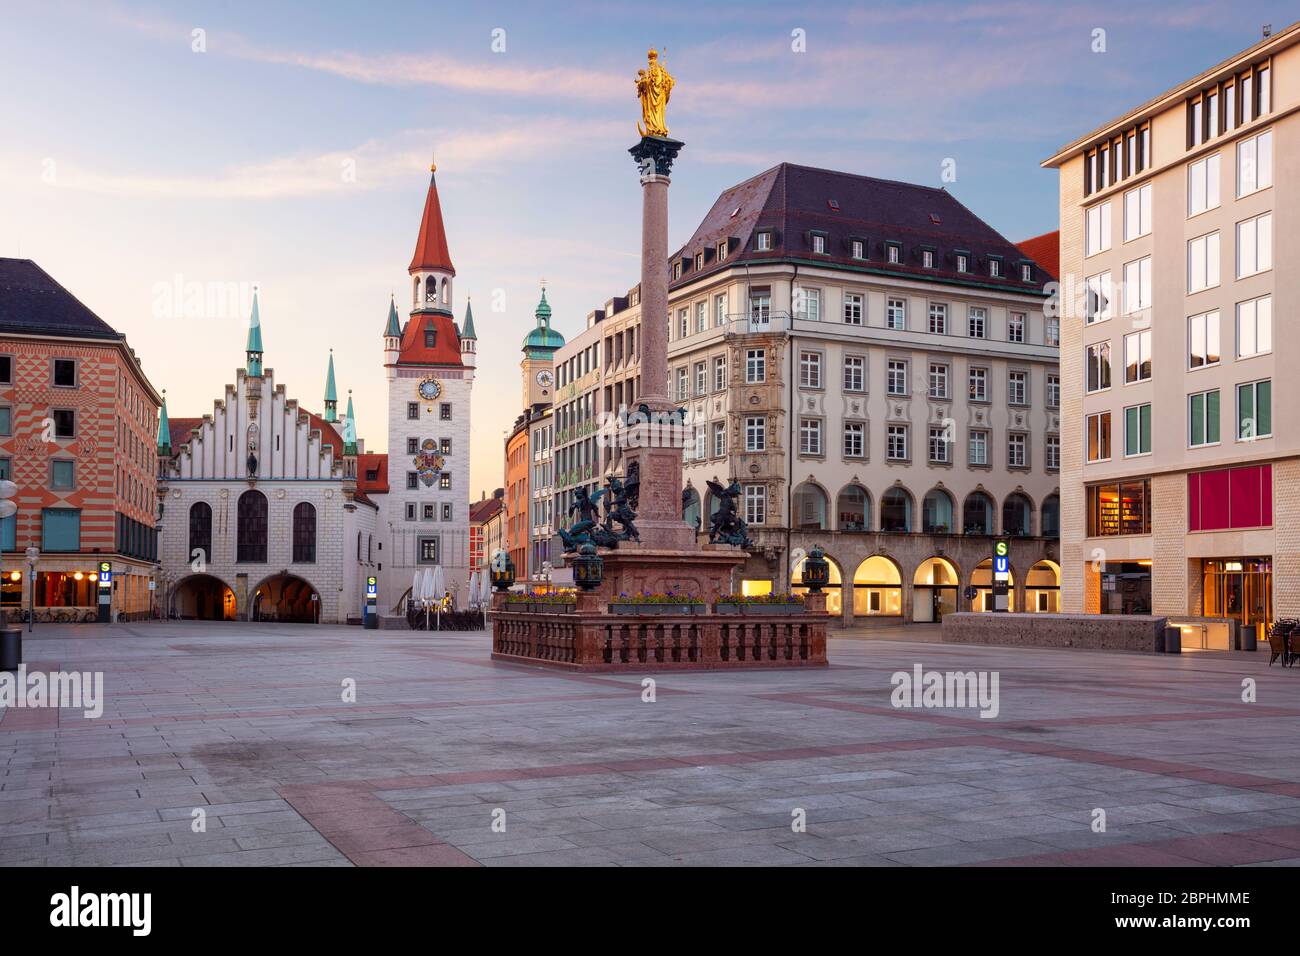 Munich. Cityscape image of Marien Square in Munich, Germany during sunrise. Stock Photo